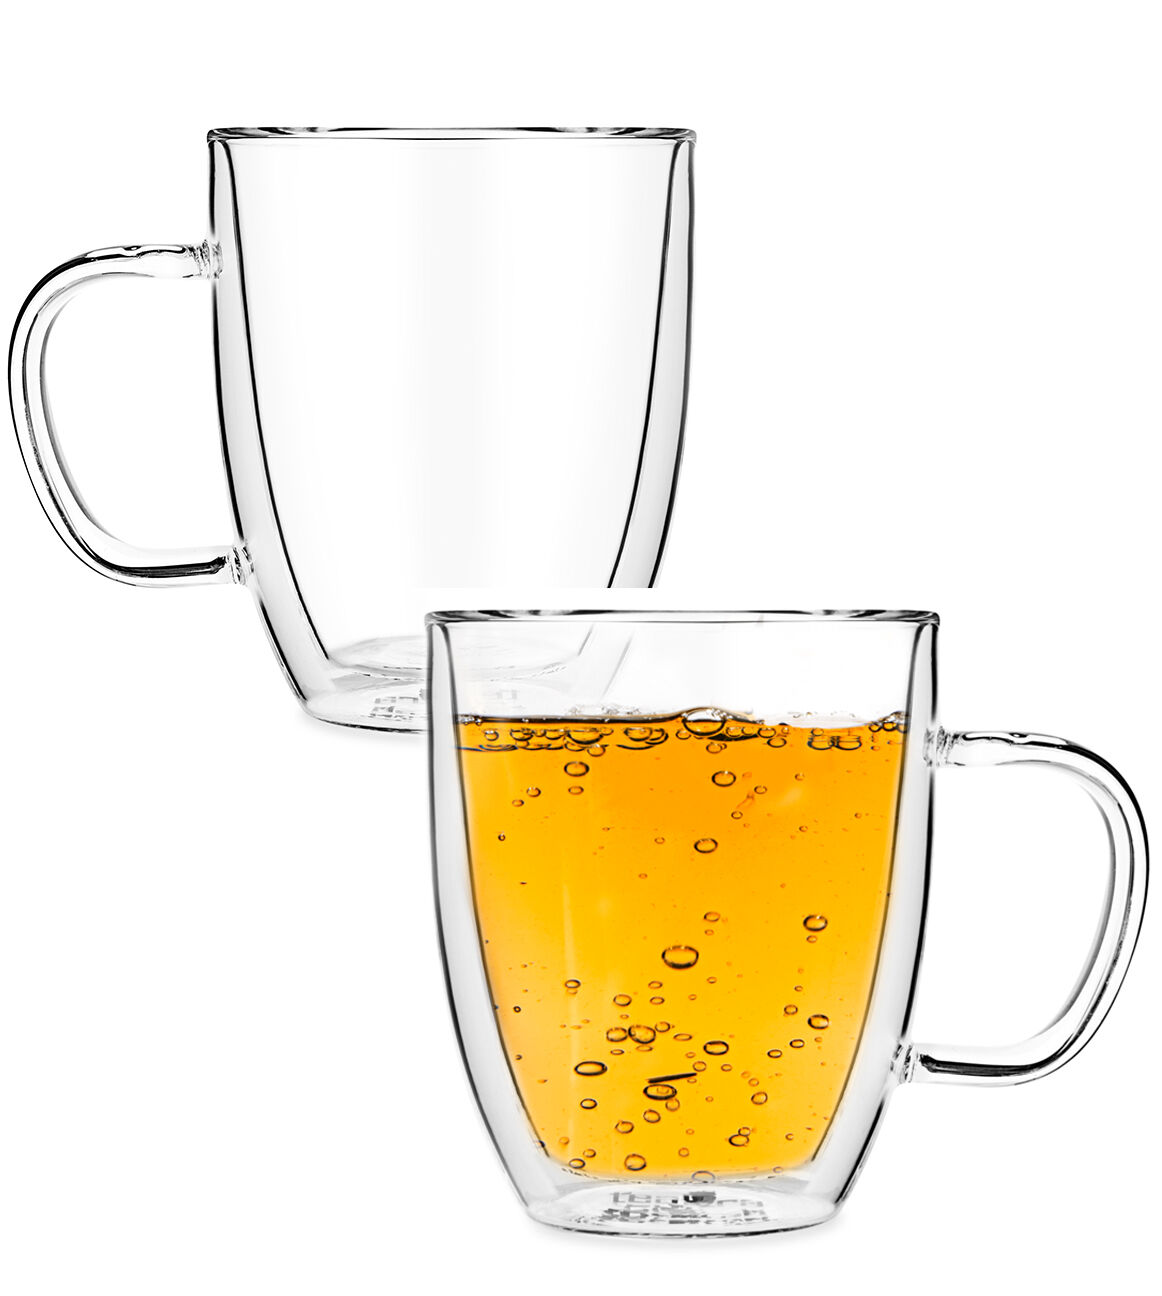 Zeus 400ml Clear Double Wall Glass Mug with Handle Set of 2 Glasses in Carton Gift-Box Tealyra Keeps Beverages Hot Yet Stays Cool to The Touch Perfect Cup for Tea and Coffee 